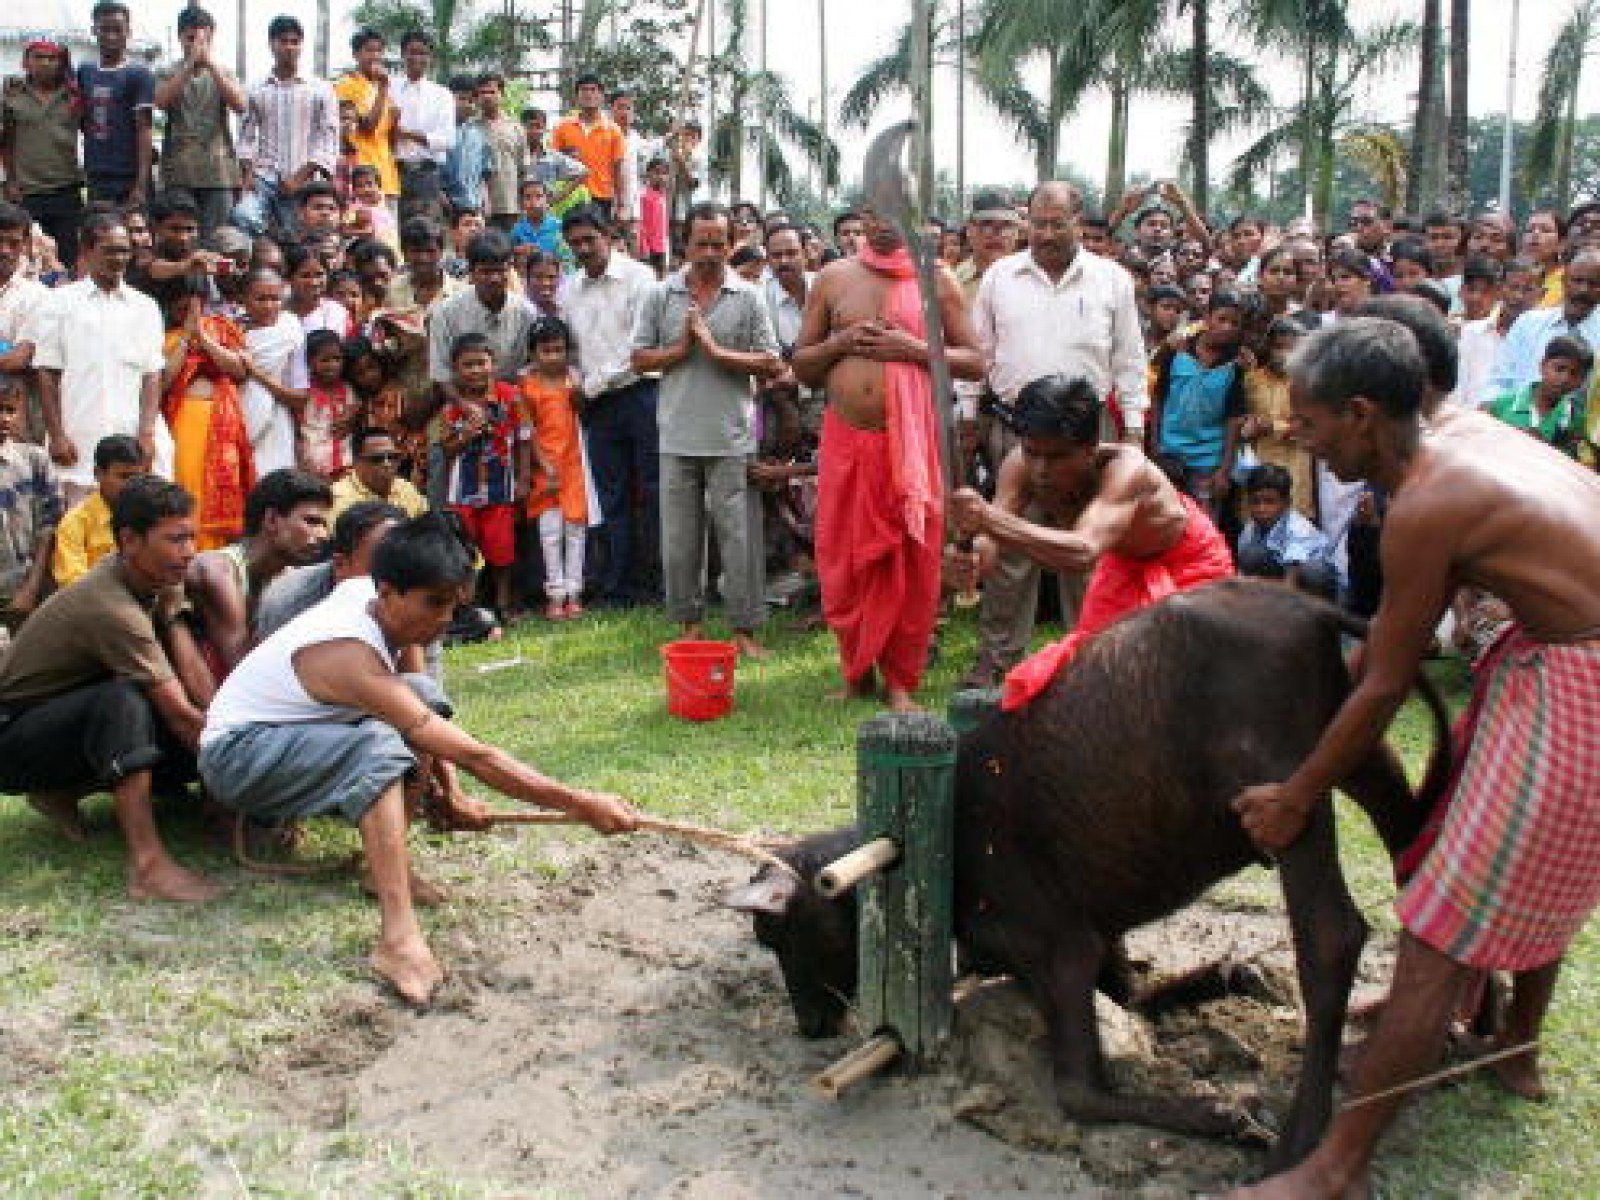 Indian Court Bans 'Cruel and Barbaric' Animal Sacrifices in Hindu Temples